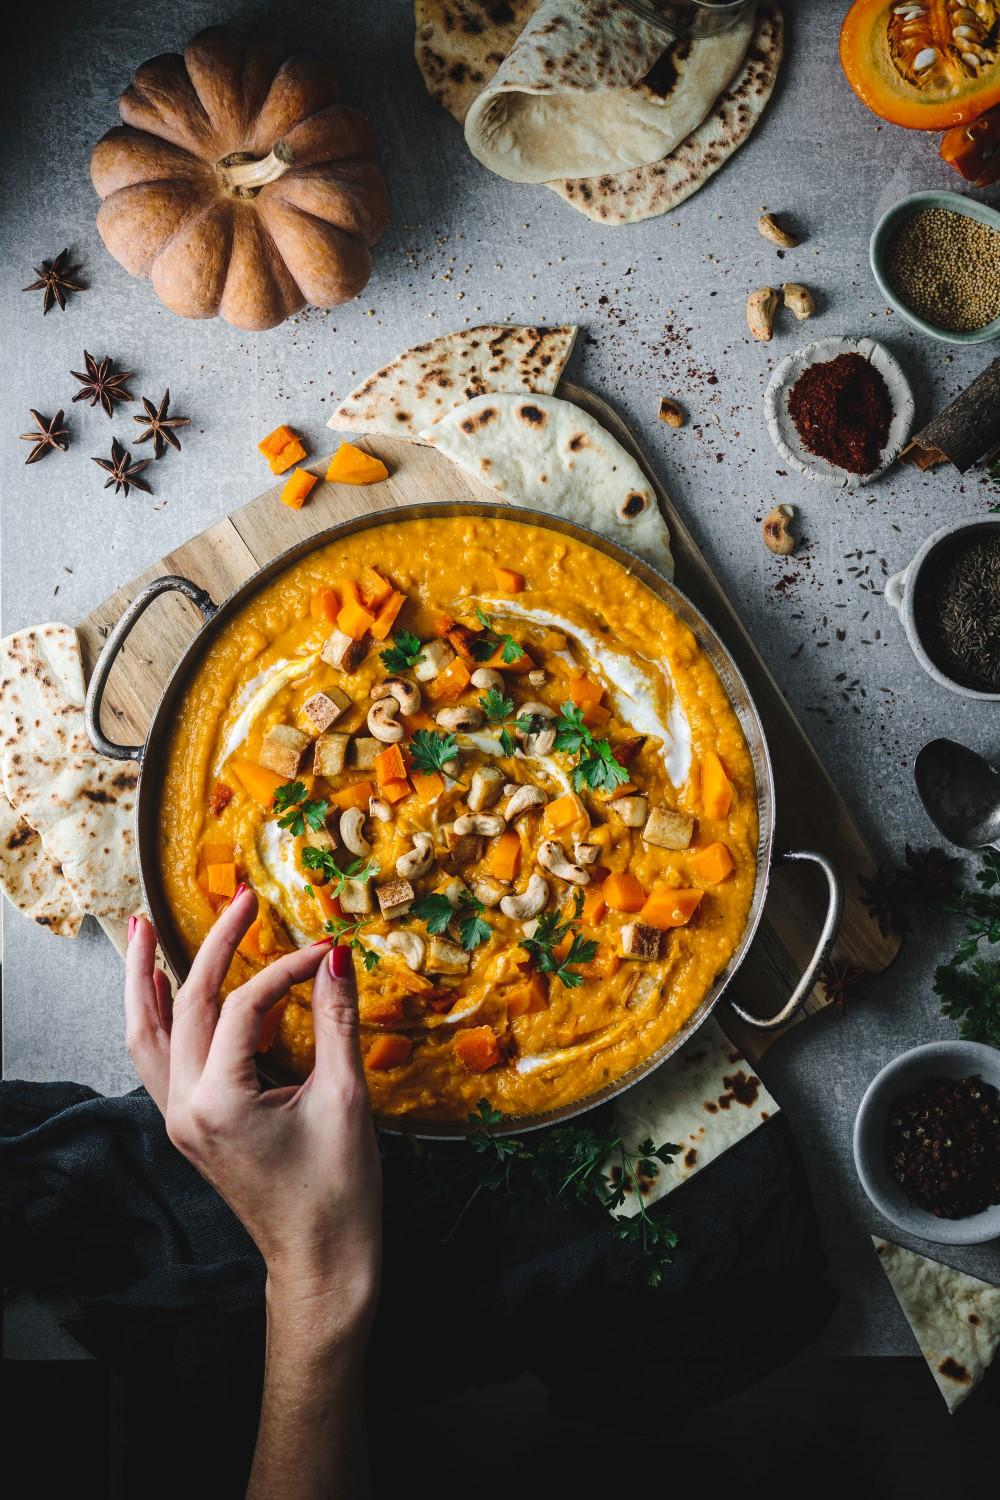 s vegan roasted pumpkin curry recipe is super comforting and is a proper late autumn dish. Nothing beats mixing pumpkin with coconut milk and fragrant spices.